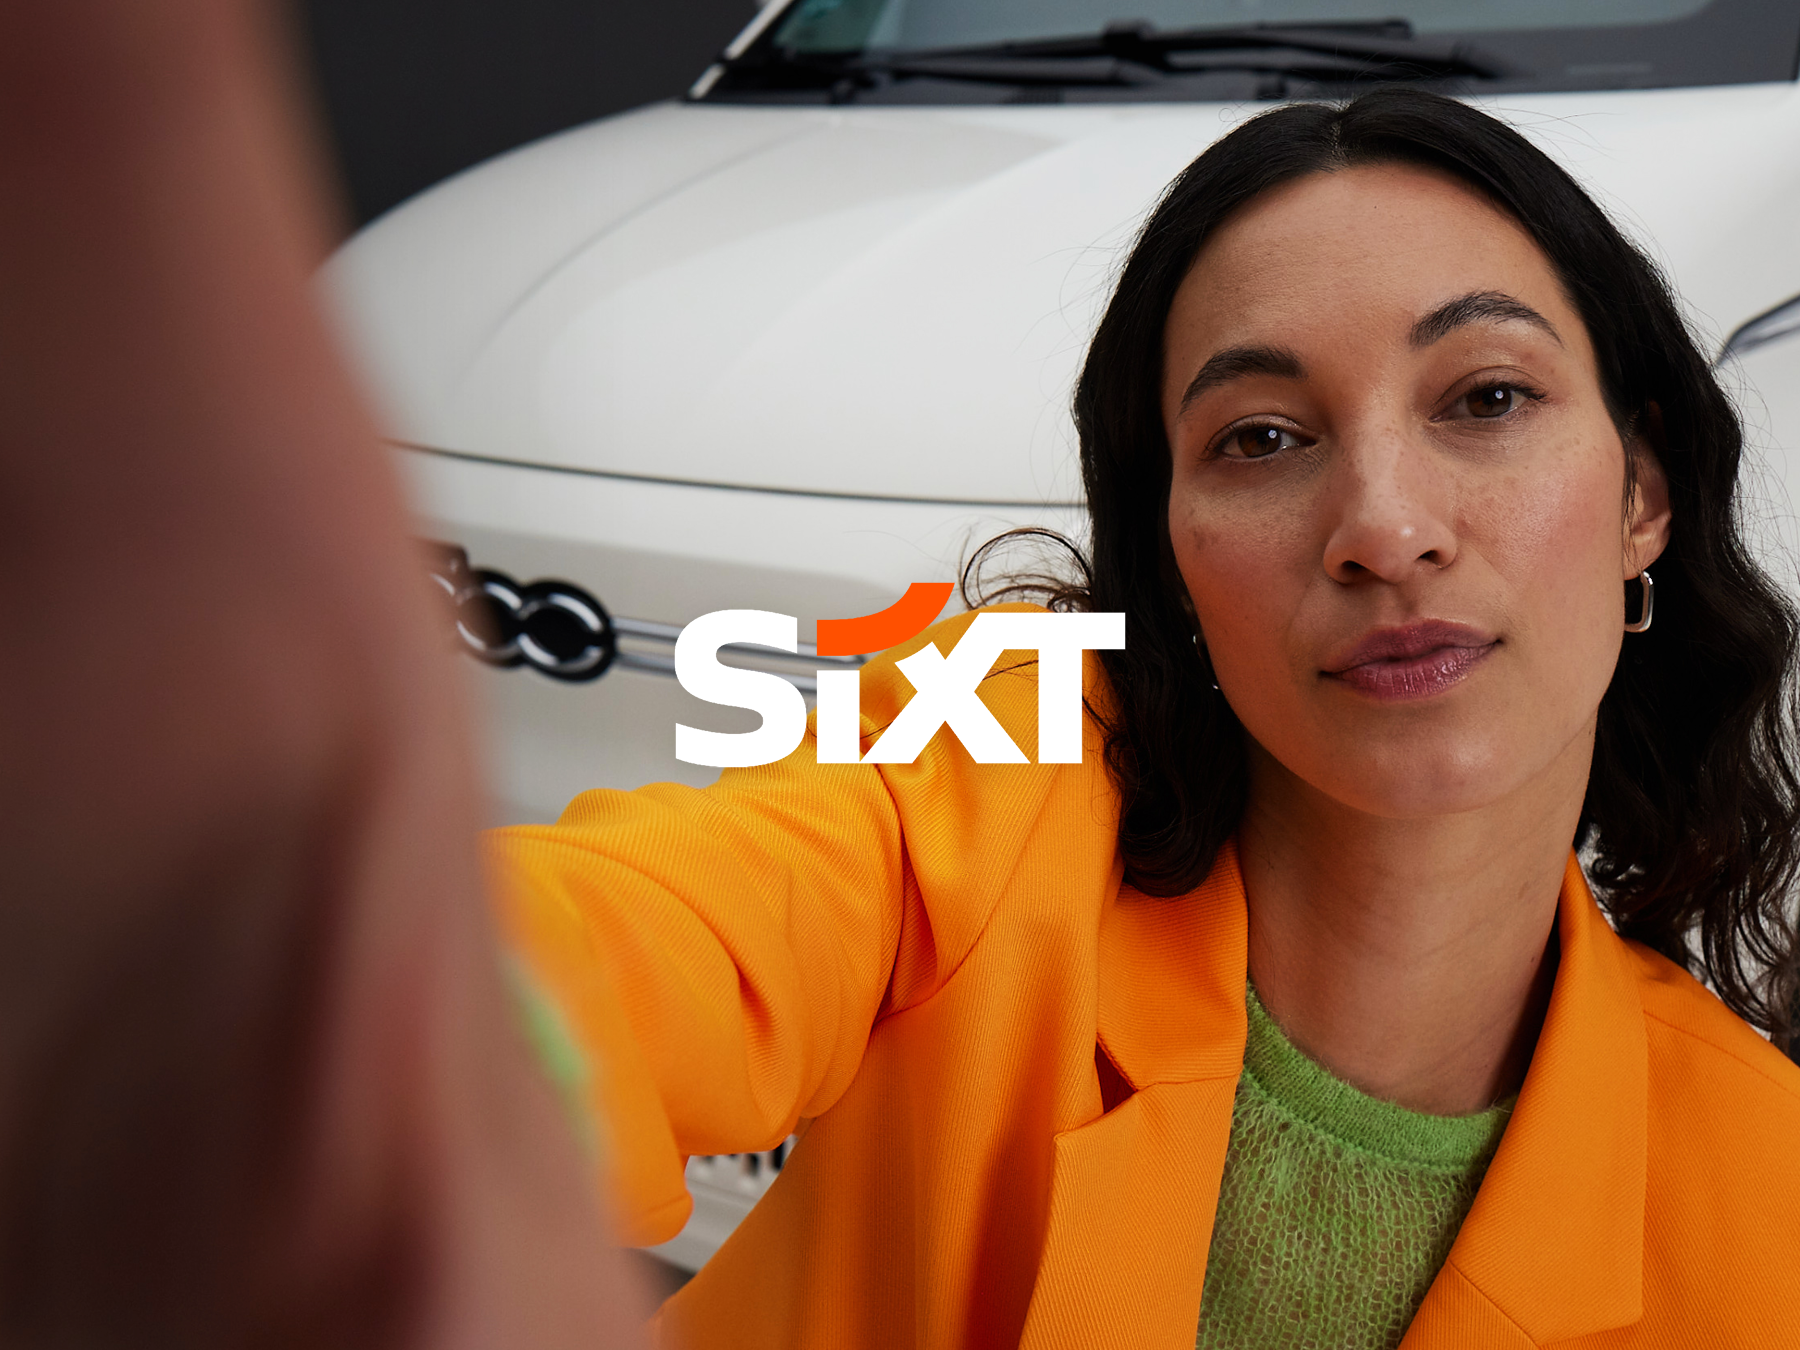 Image of a woman in orange blazer taking a selfie of herself. In the background you can see a white Fiat 500. In the middle as an overlay the slogan "Sixt".